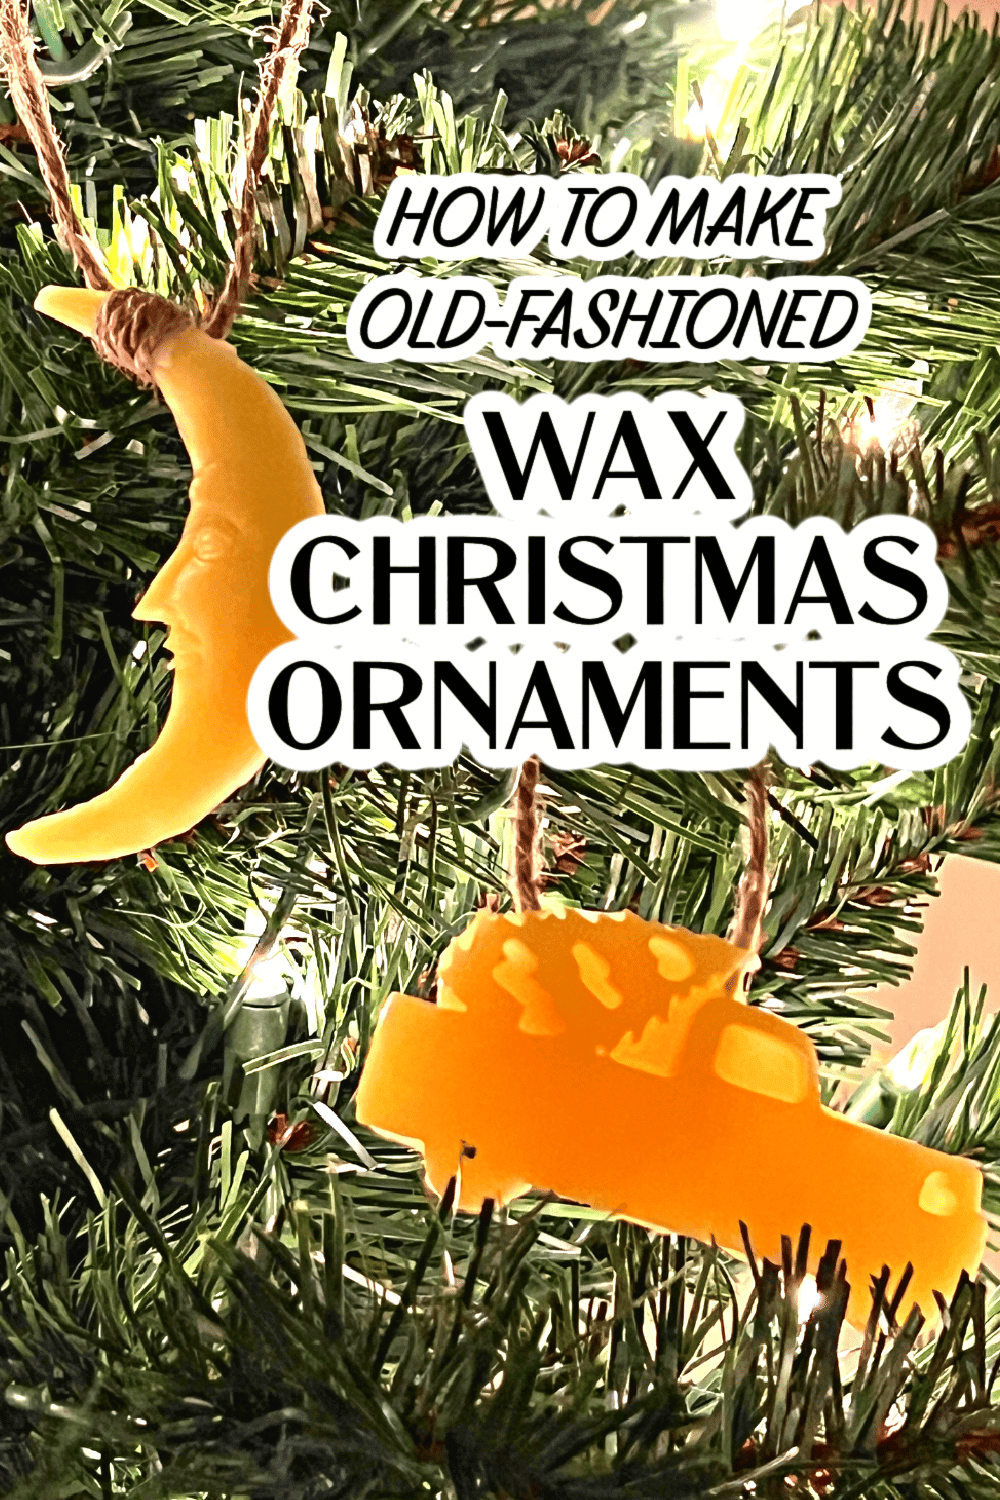 Beeswax pouring ornaments Christmas tree decorations